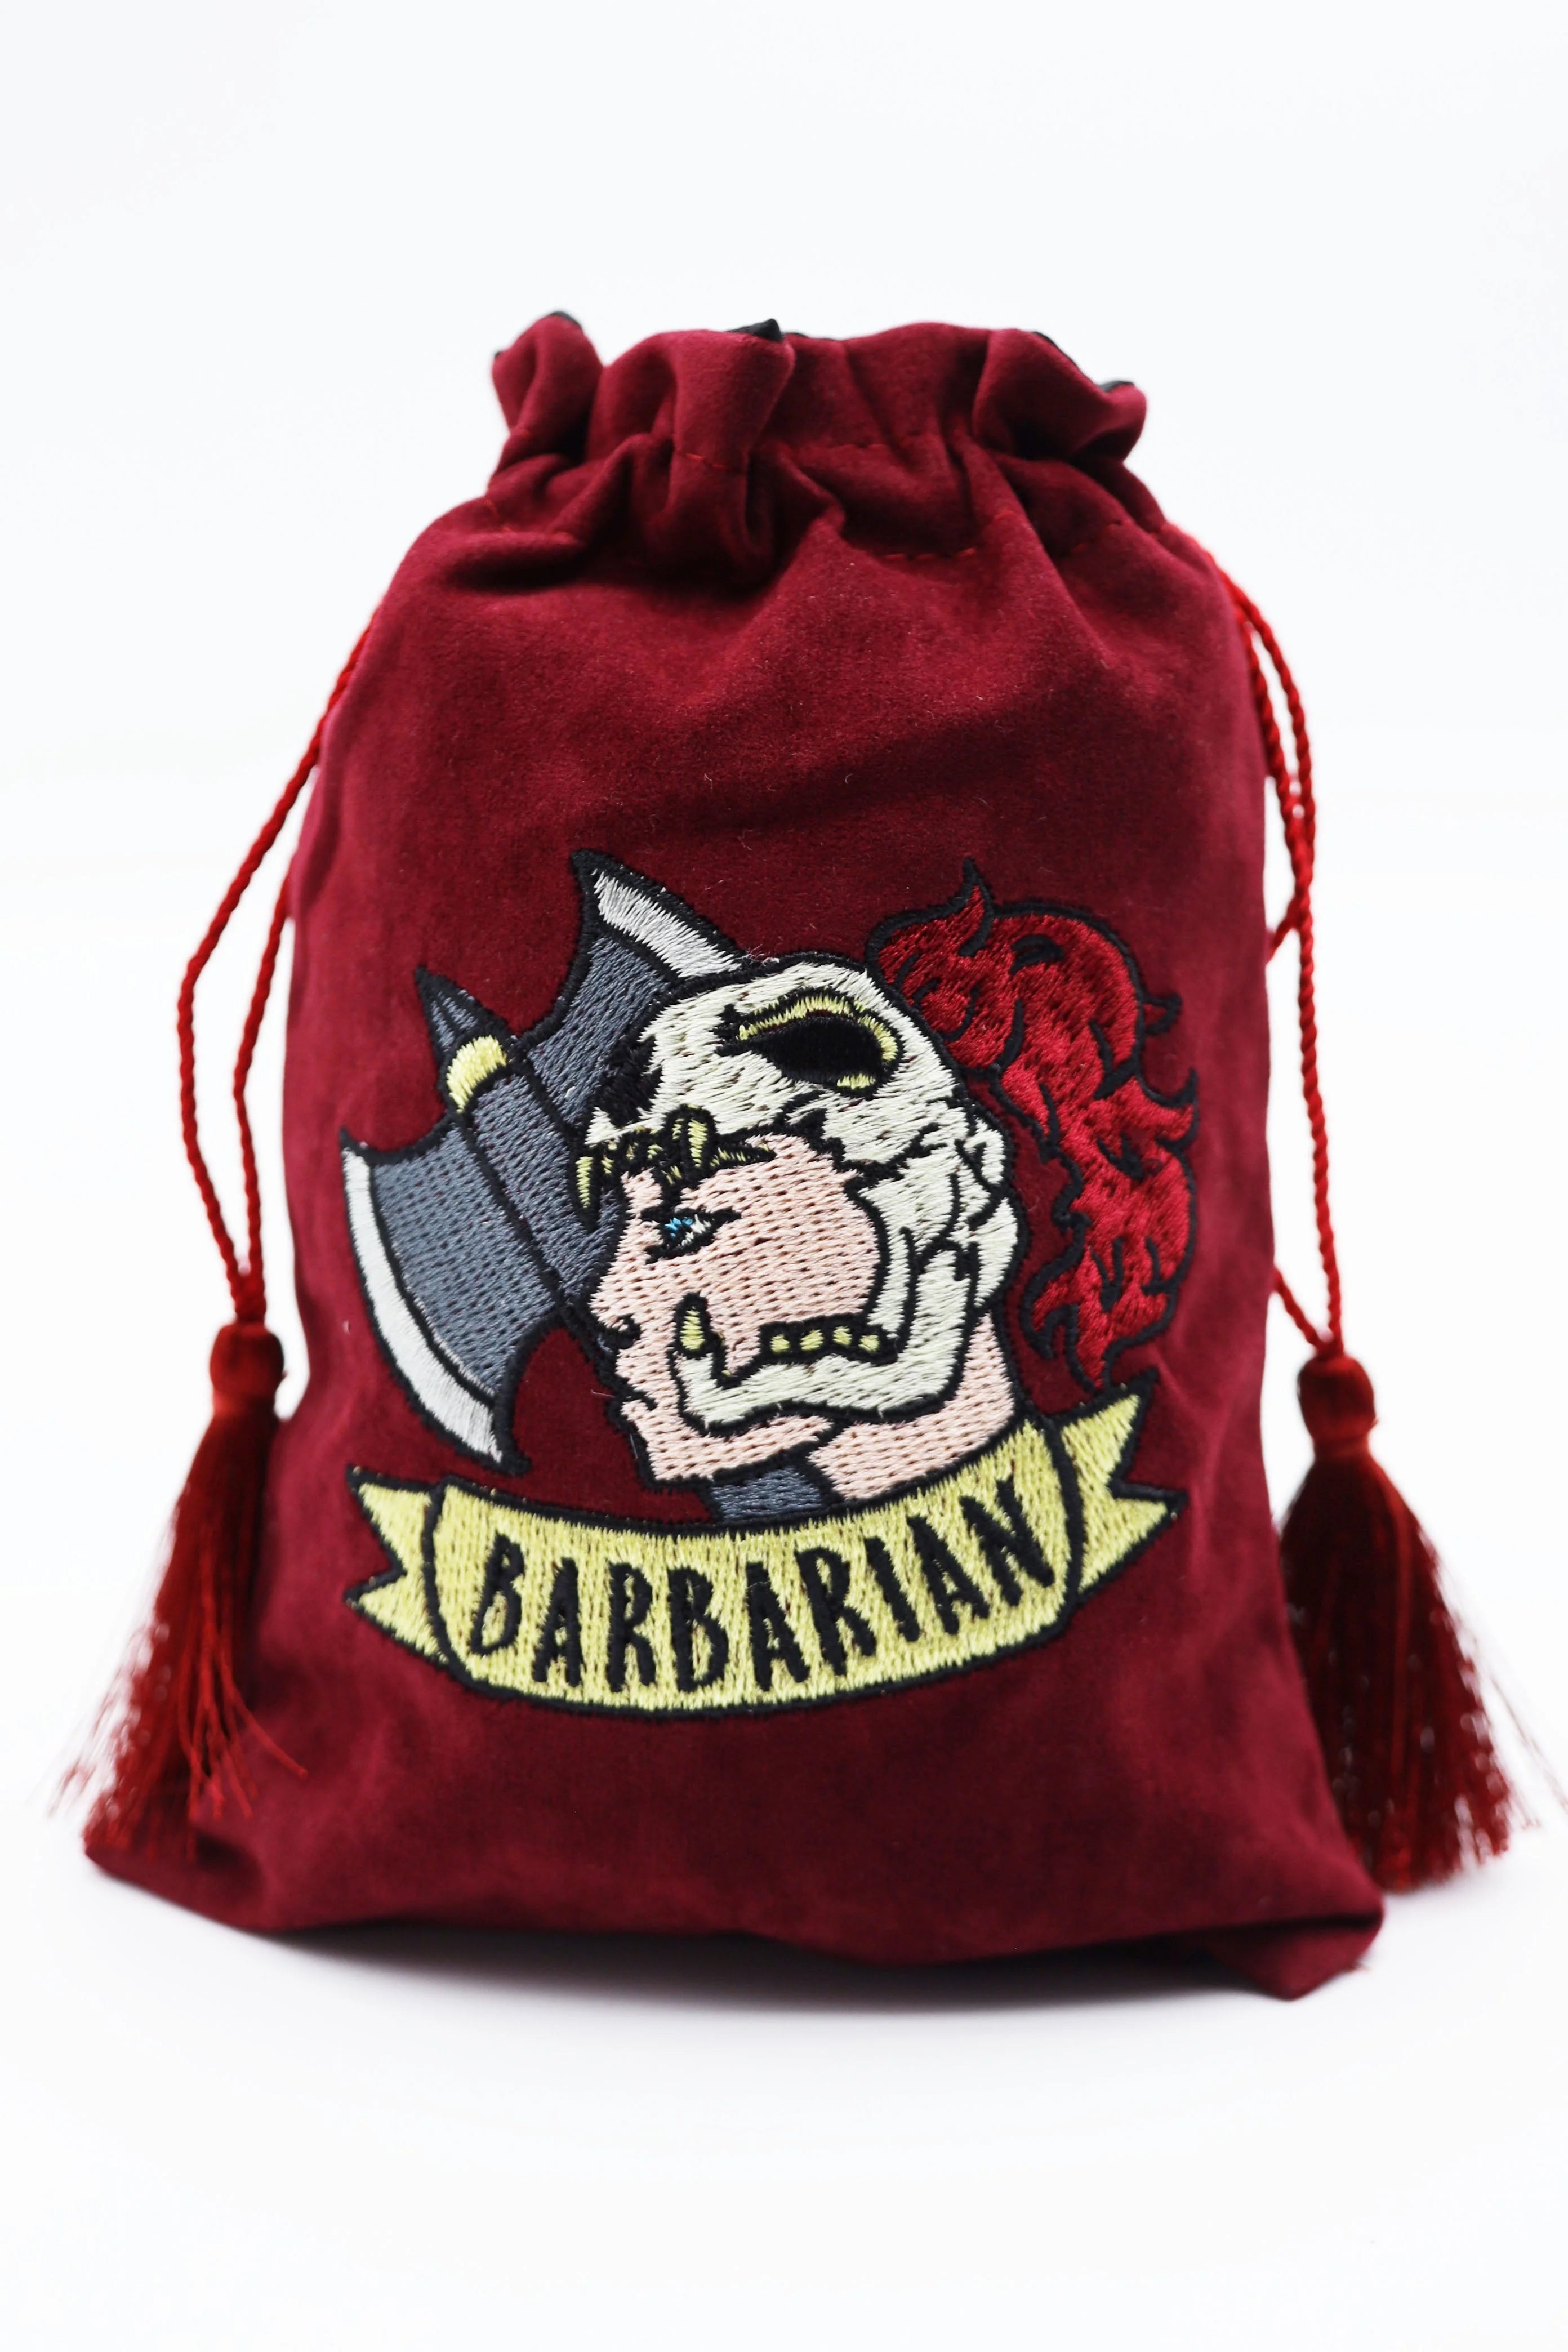 DICE BAG - BARBARIAN Dice & Counters Foam Brain Games    | Red Claw Gaming